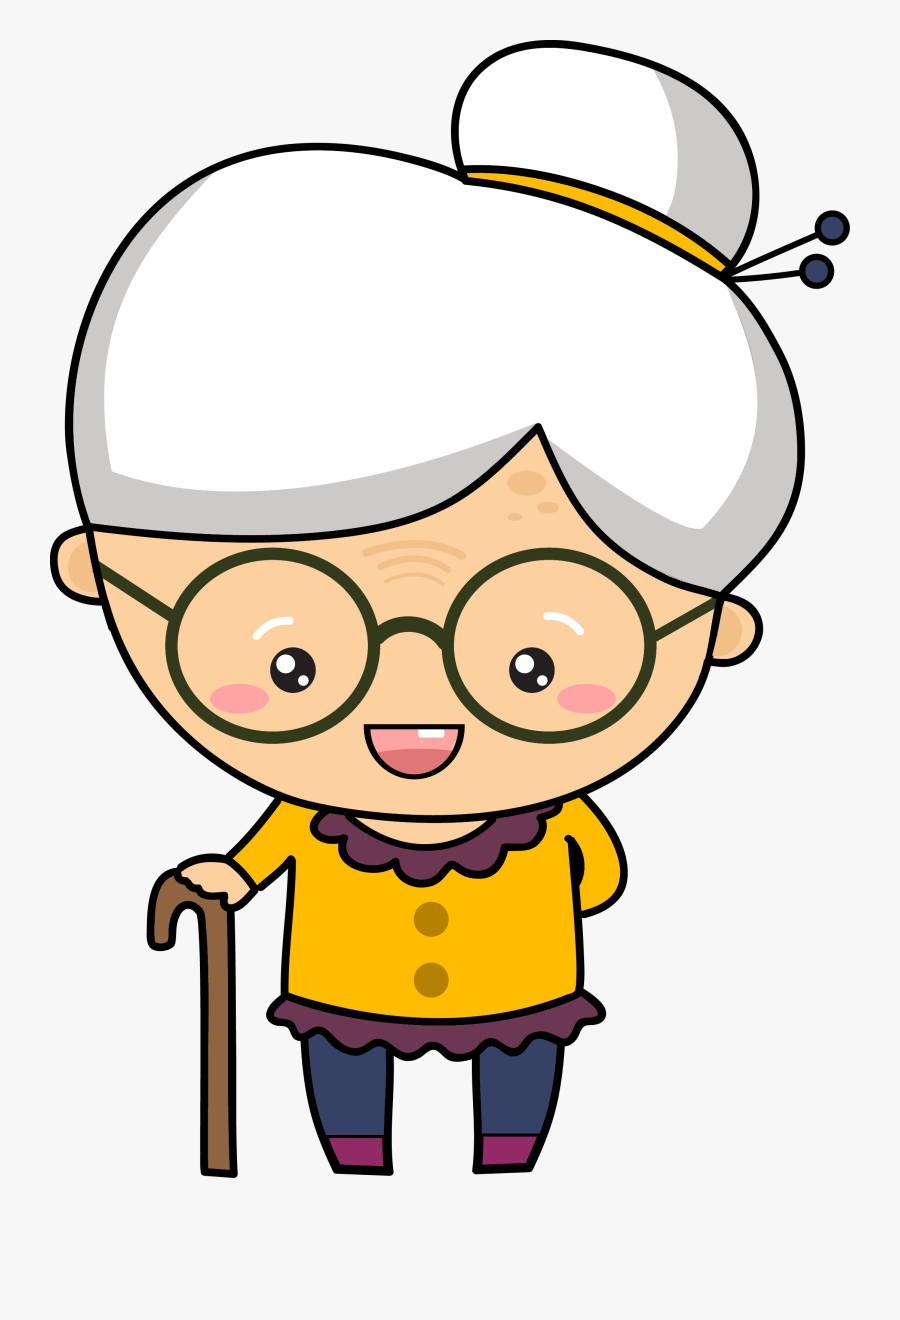 Grandmother Clipart Animated - Grand Mother Cartoon Image Png, Transparent Clipart